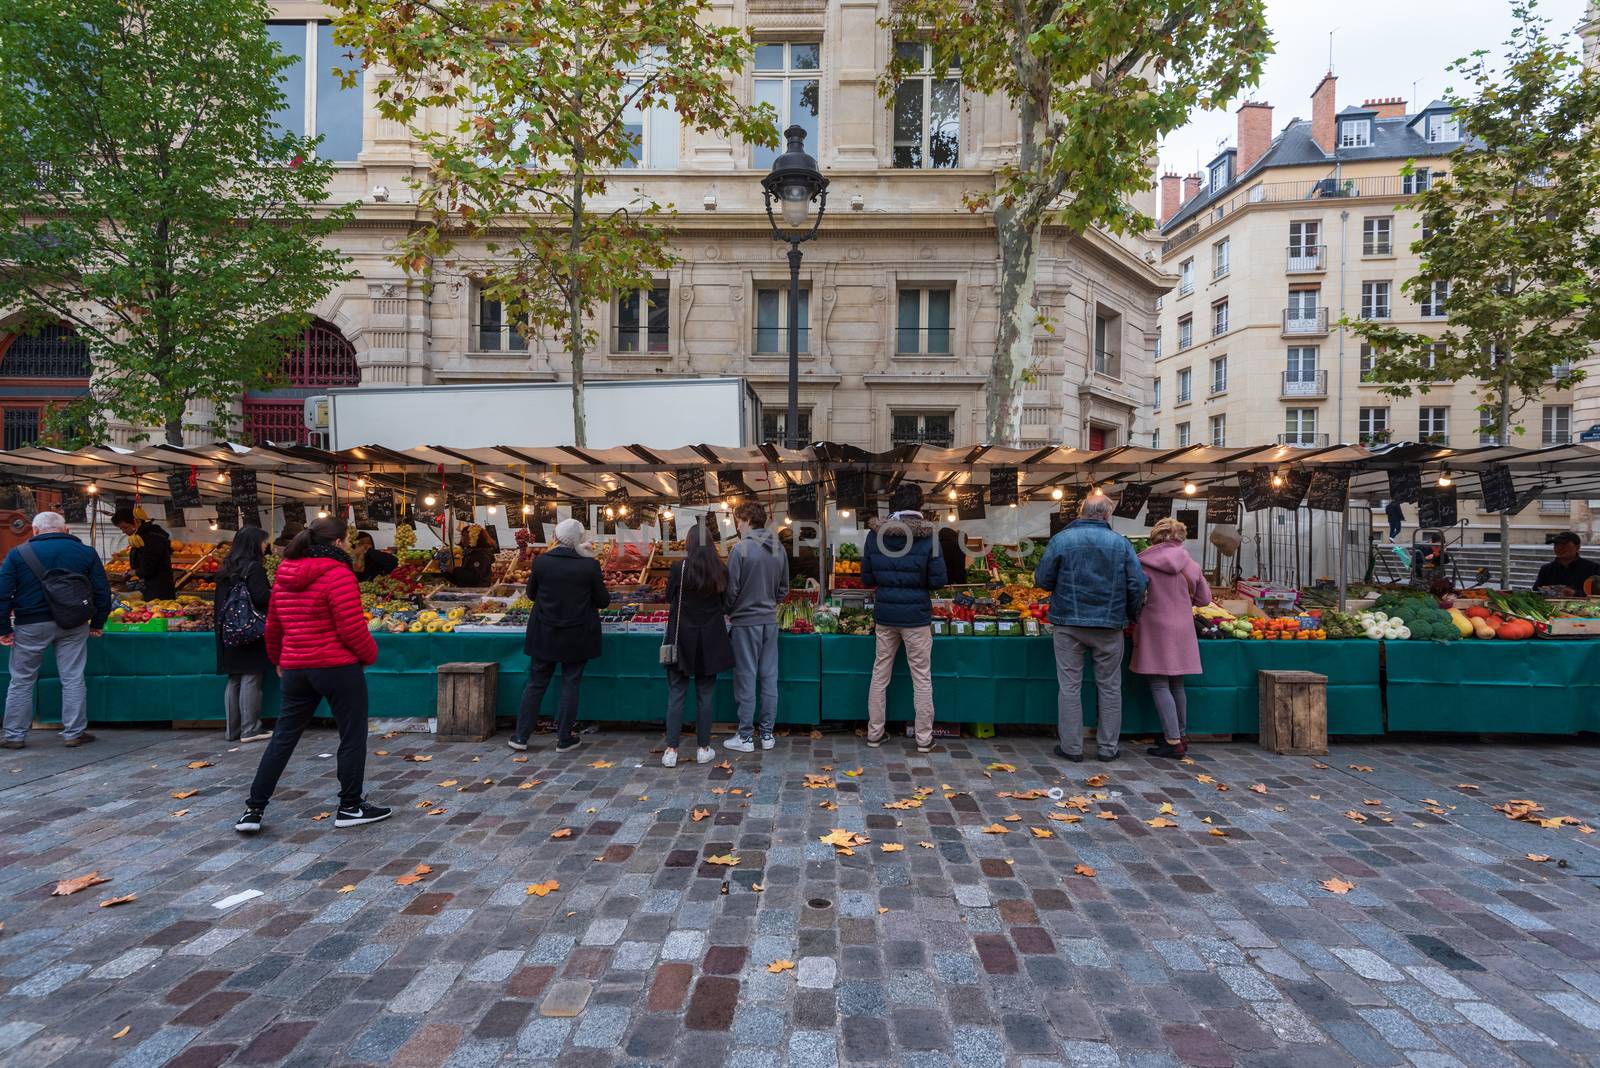 Marais, Paris, France --November 4, 2017. An ultra wide angle photo of Parisians shopping for groceries in a Farmers Market in the Marais section of Paris.